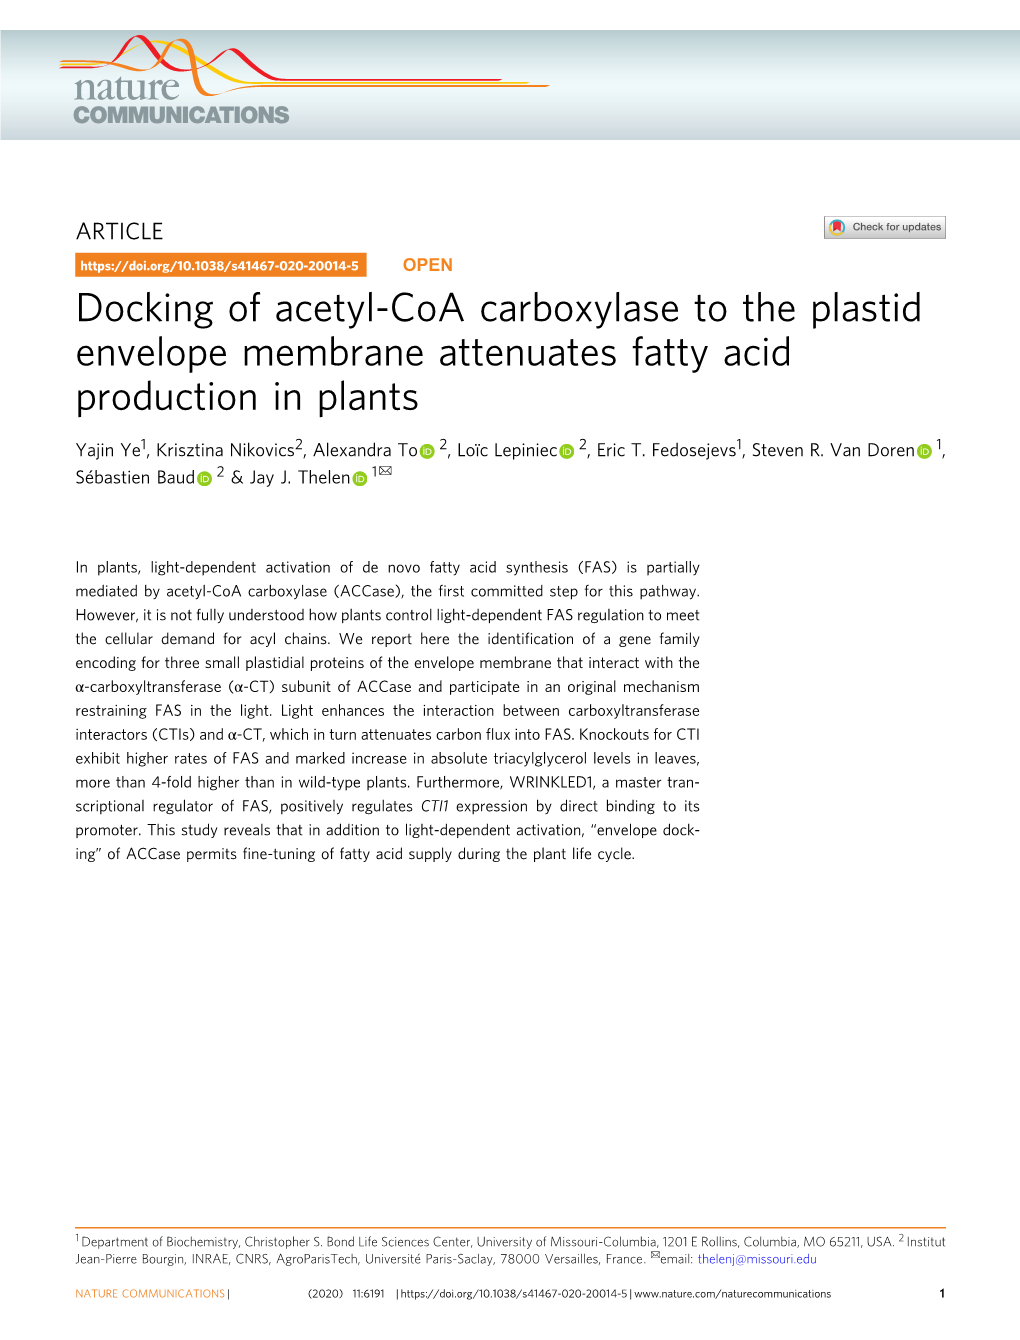 Docking of Acetyl-Coa Carboxylase to the Plastid Envelope Membrane Attenuates Fatty Acid Production in Plants